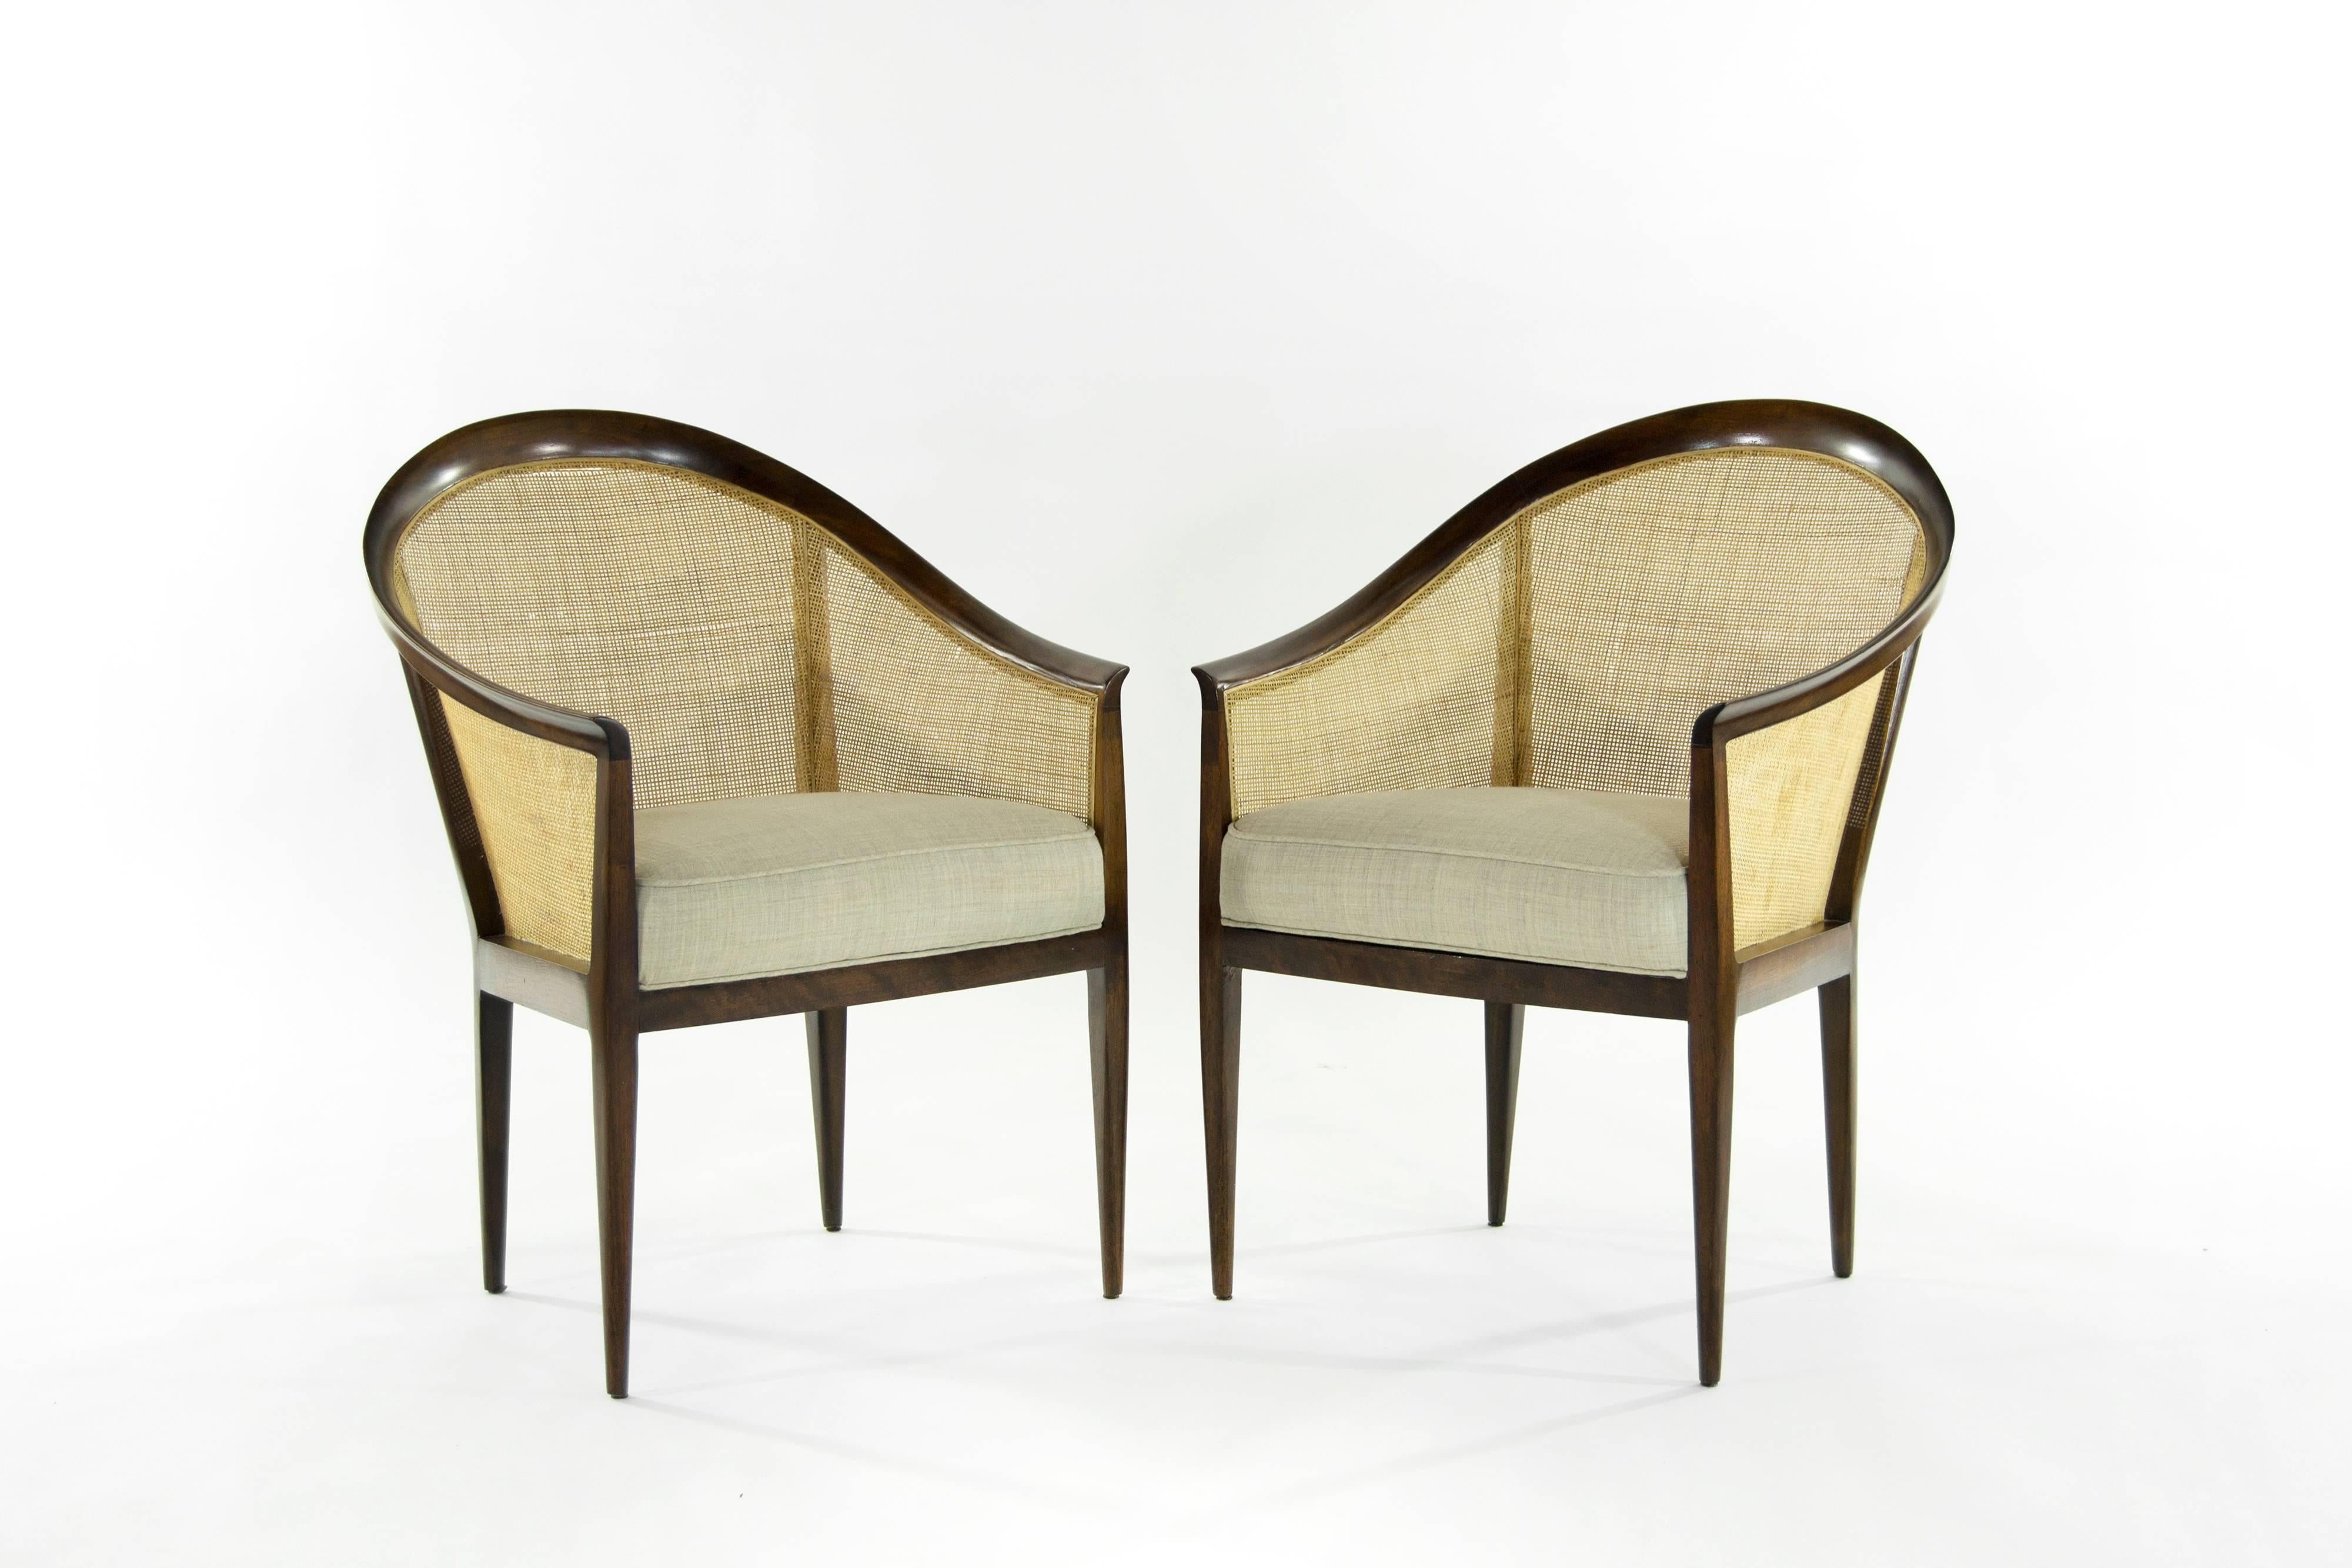 A very handsome pair of lounge chairs designed by Kipp Stewart for Directional, circa 1950s. Walnut frames newly refinished in natural, original caning in excellent condition. Seats newly upholstered in beige linen.